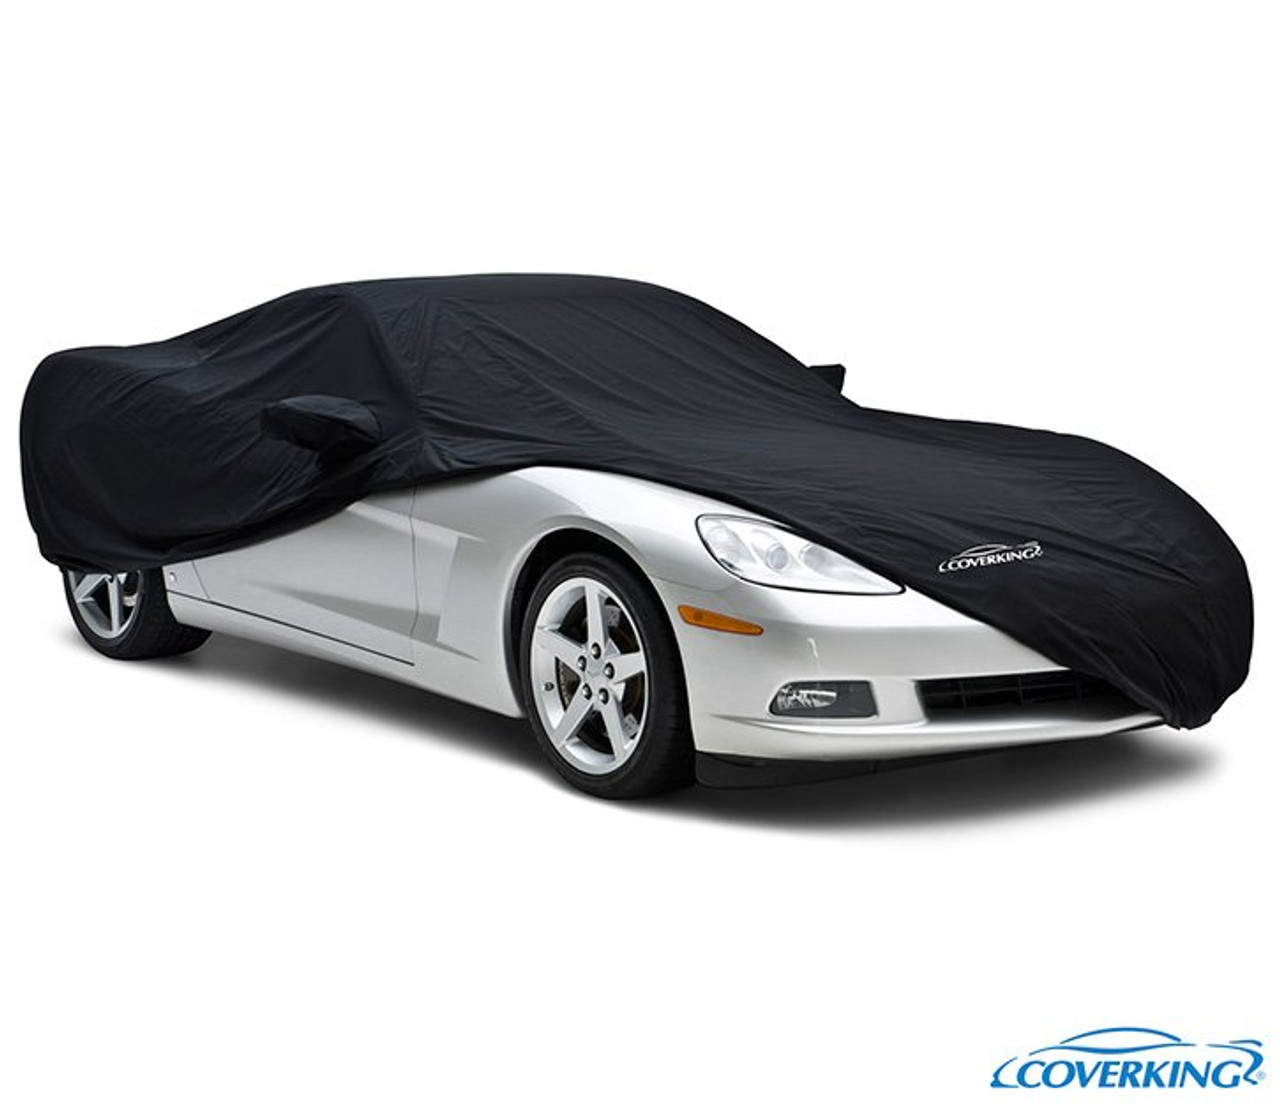 Stormproof Custom Car Covers: Protect Your Investment